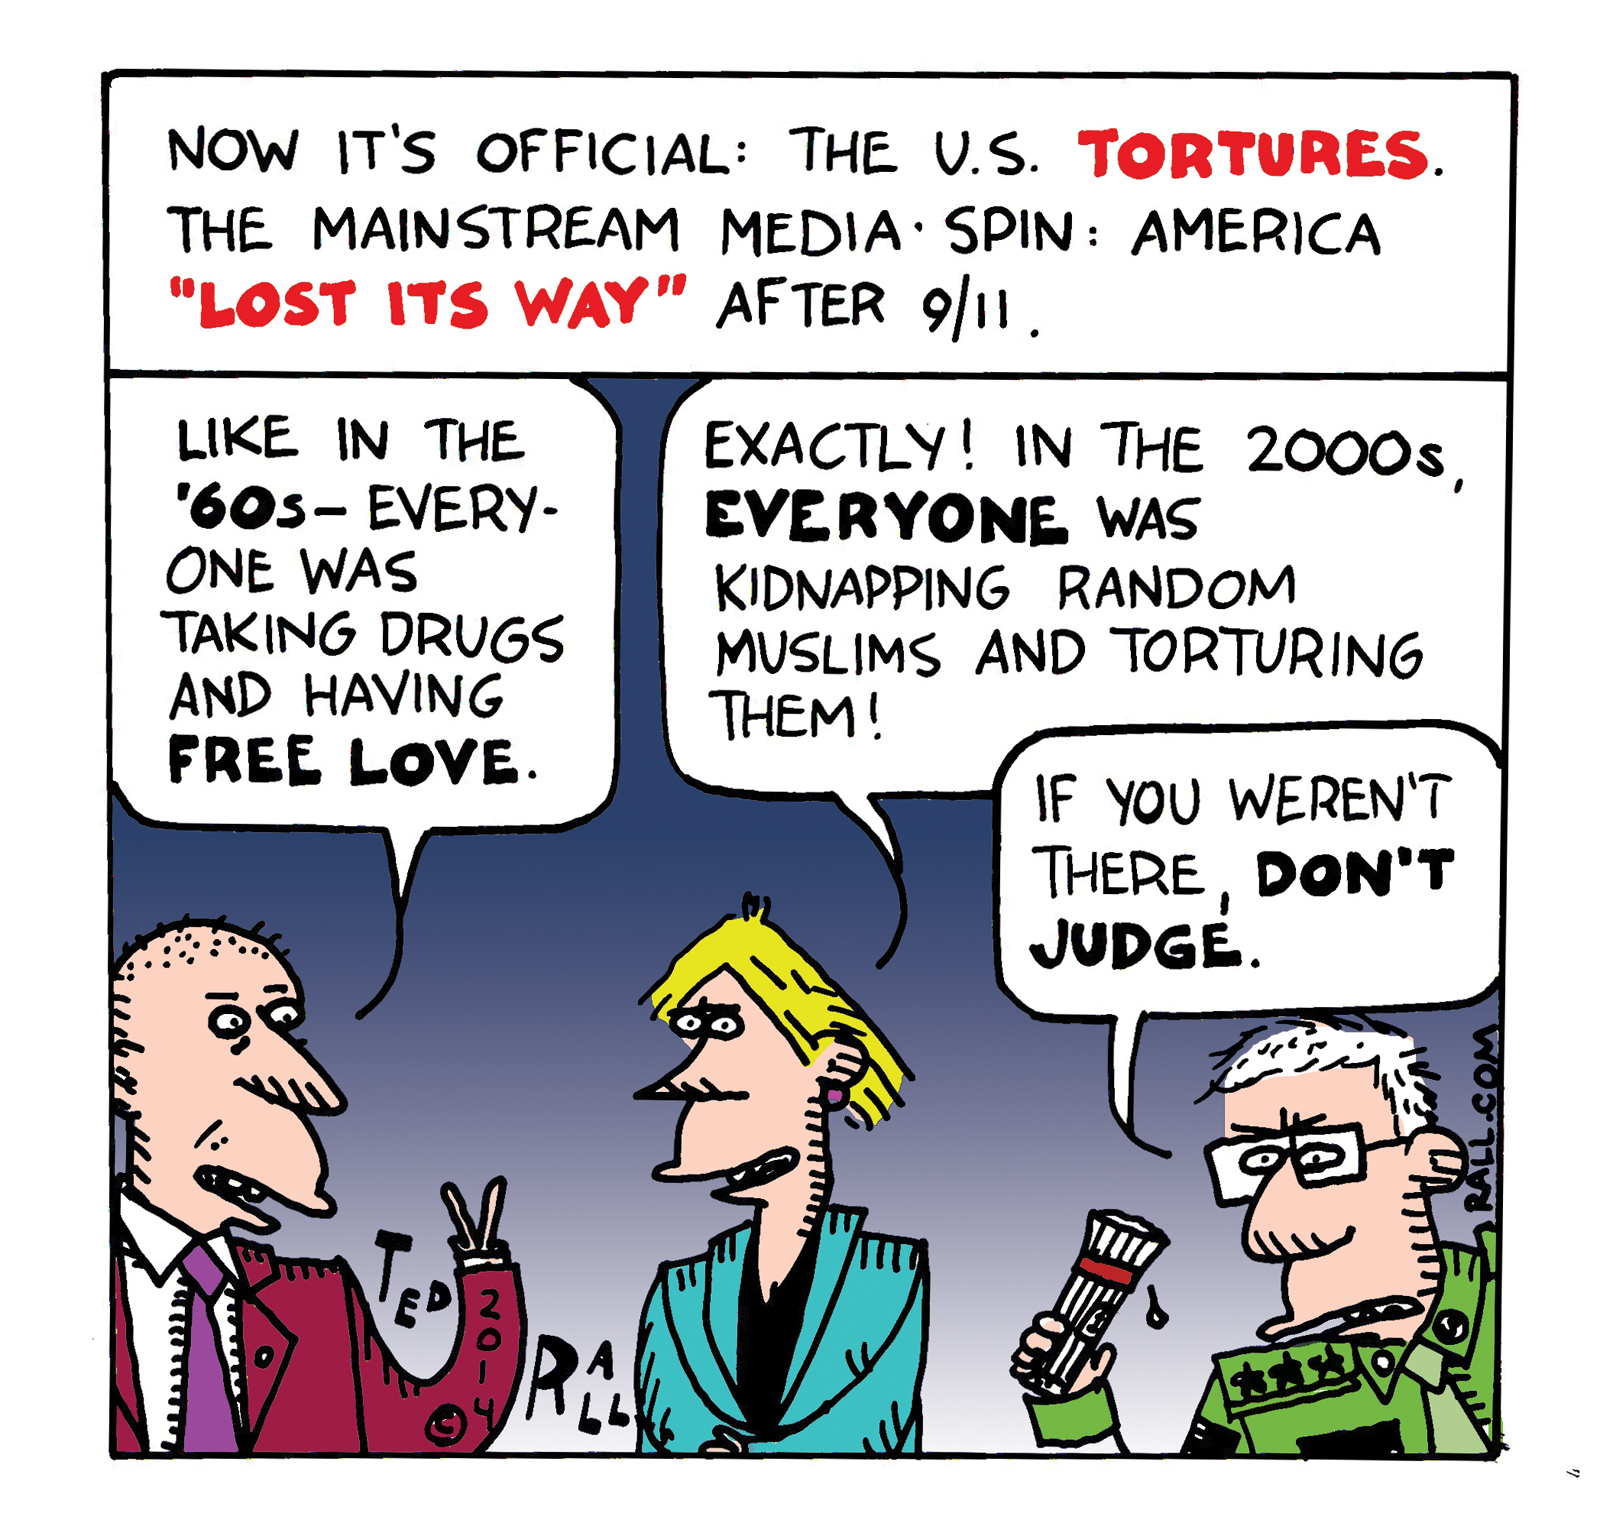 The Wild Post-9/11 Torture Party